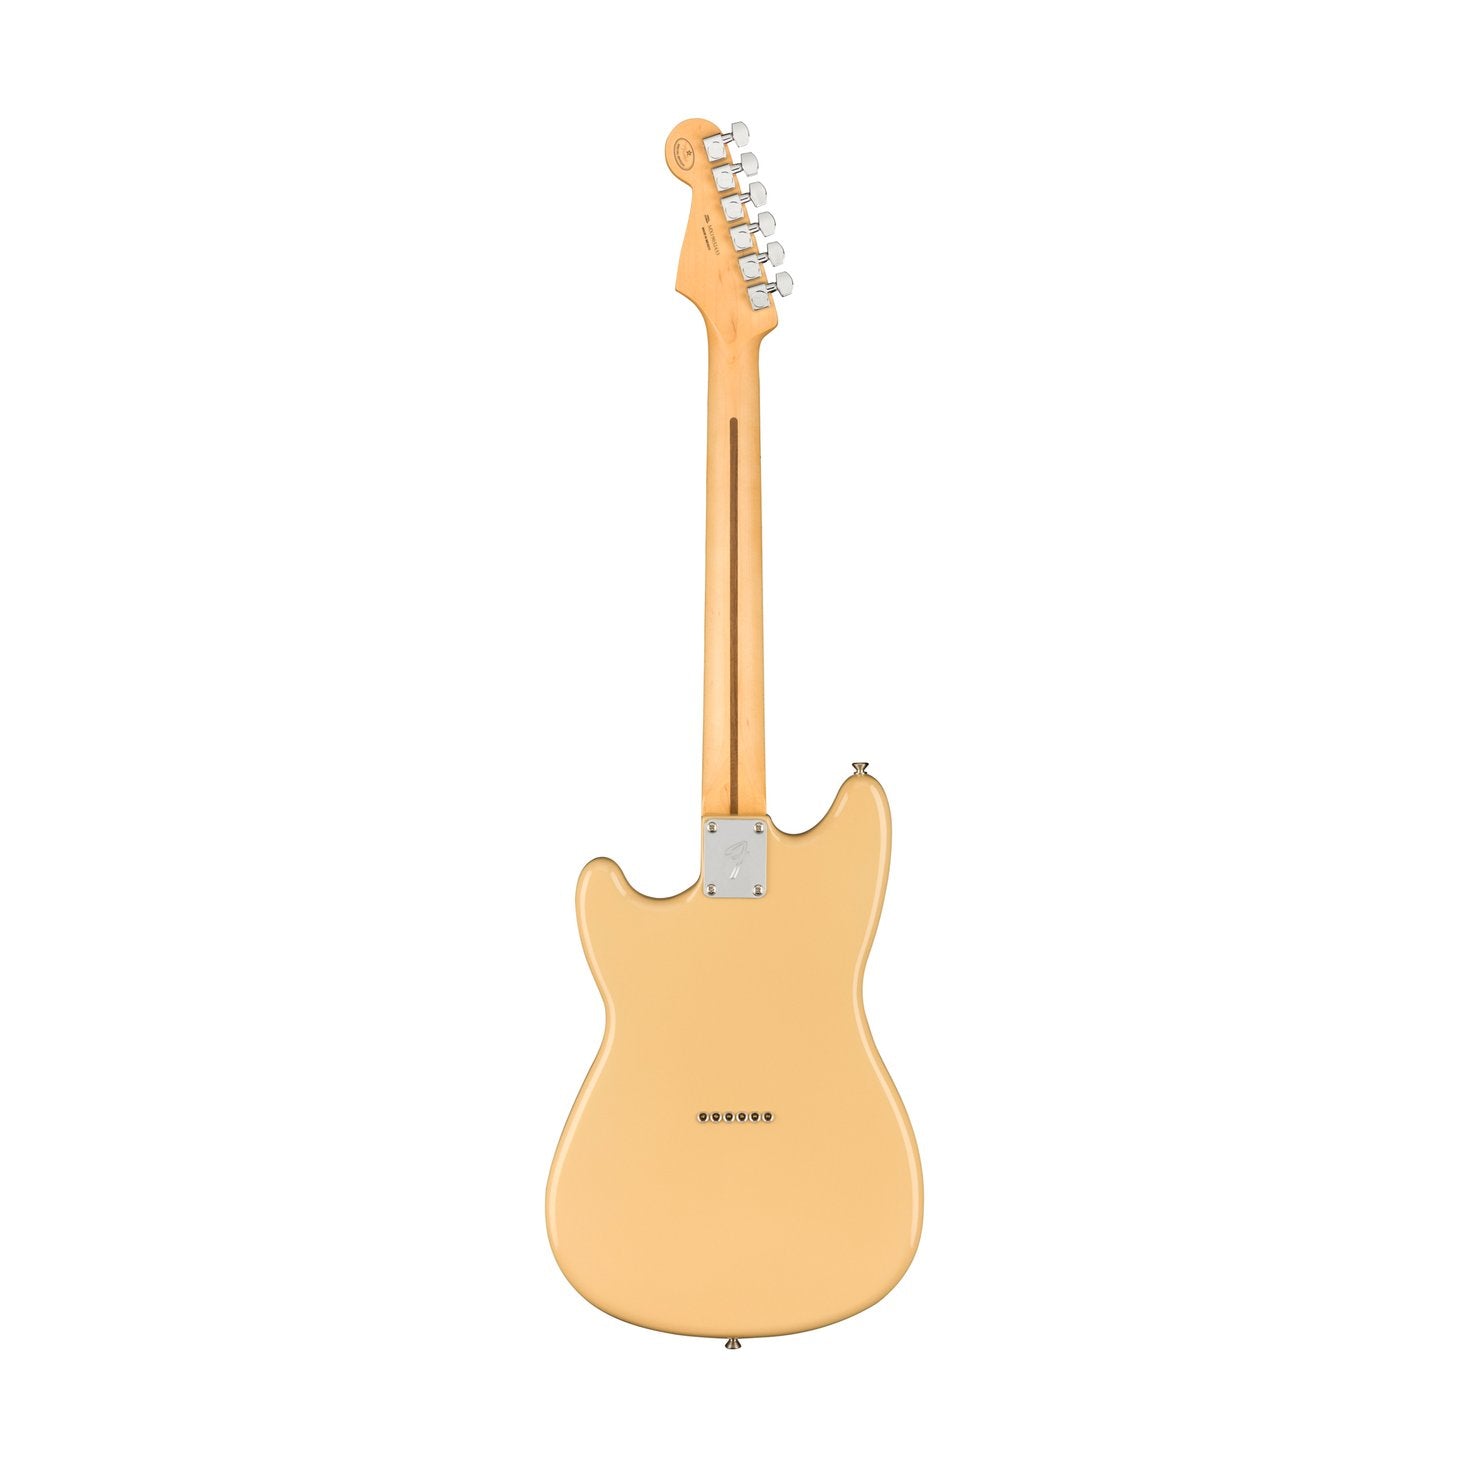 Fender Player Duo-Sonic Electric Guitar, Maple FB, Desert Sand, FENDER, ELECTRIC GUITAR, fender-eletric-guitar-f03-014-4012-589, ZOSO MUSIC SDN BHD